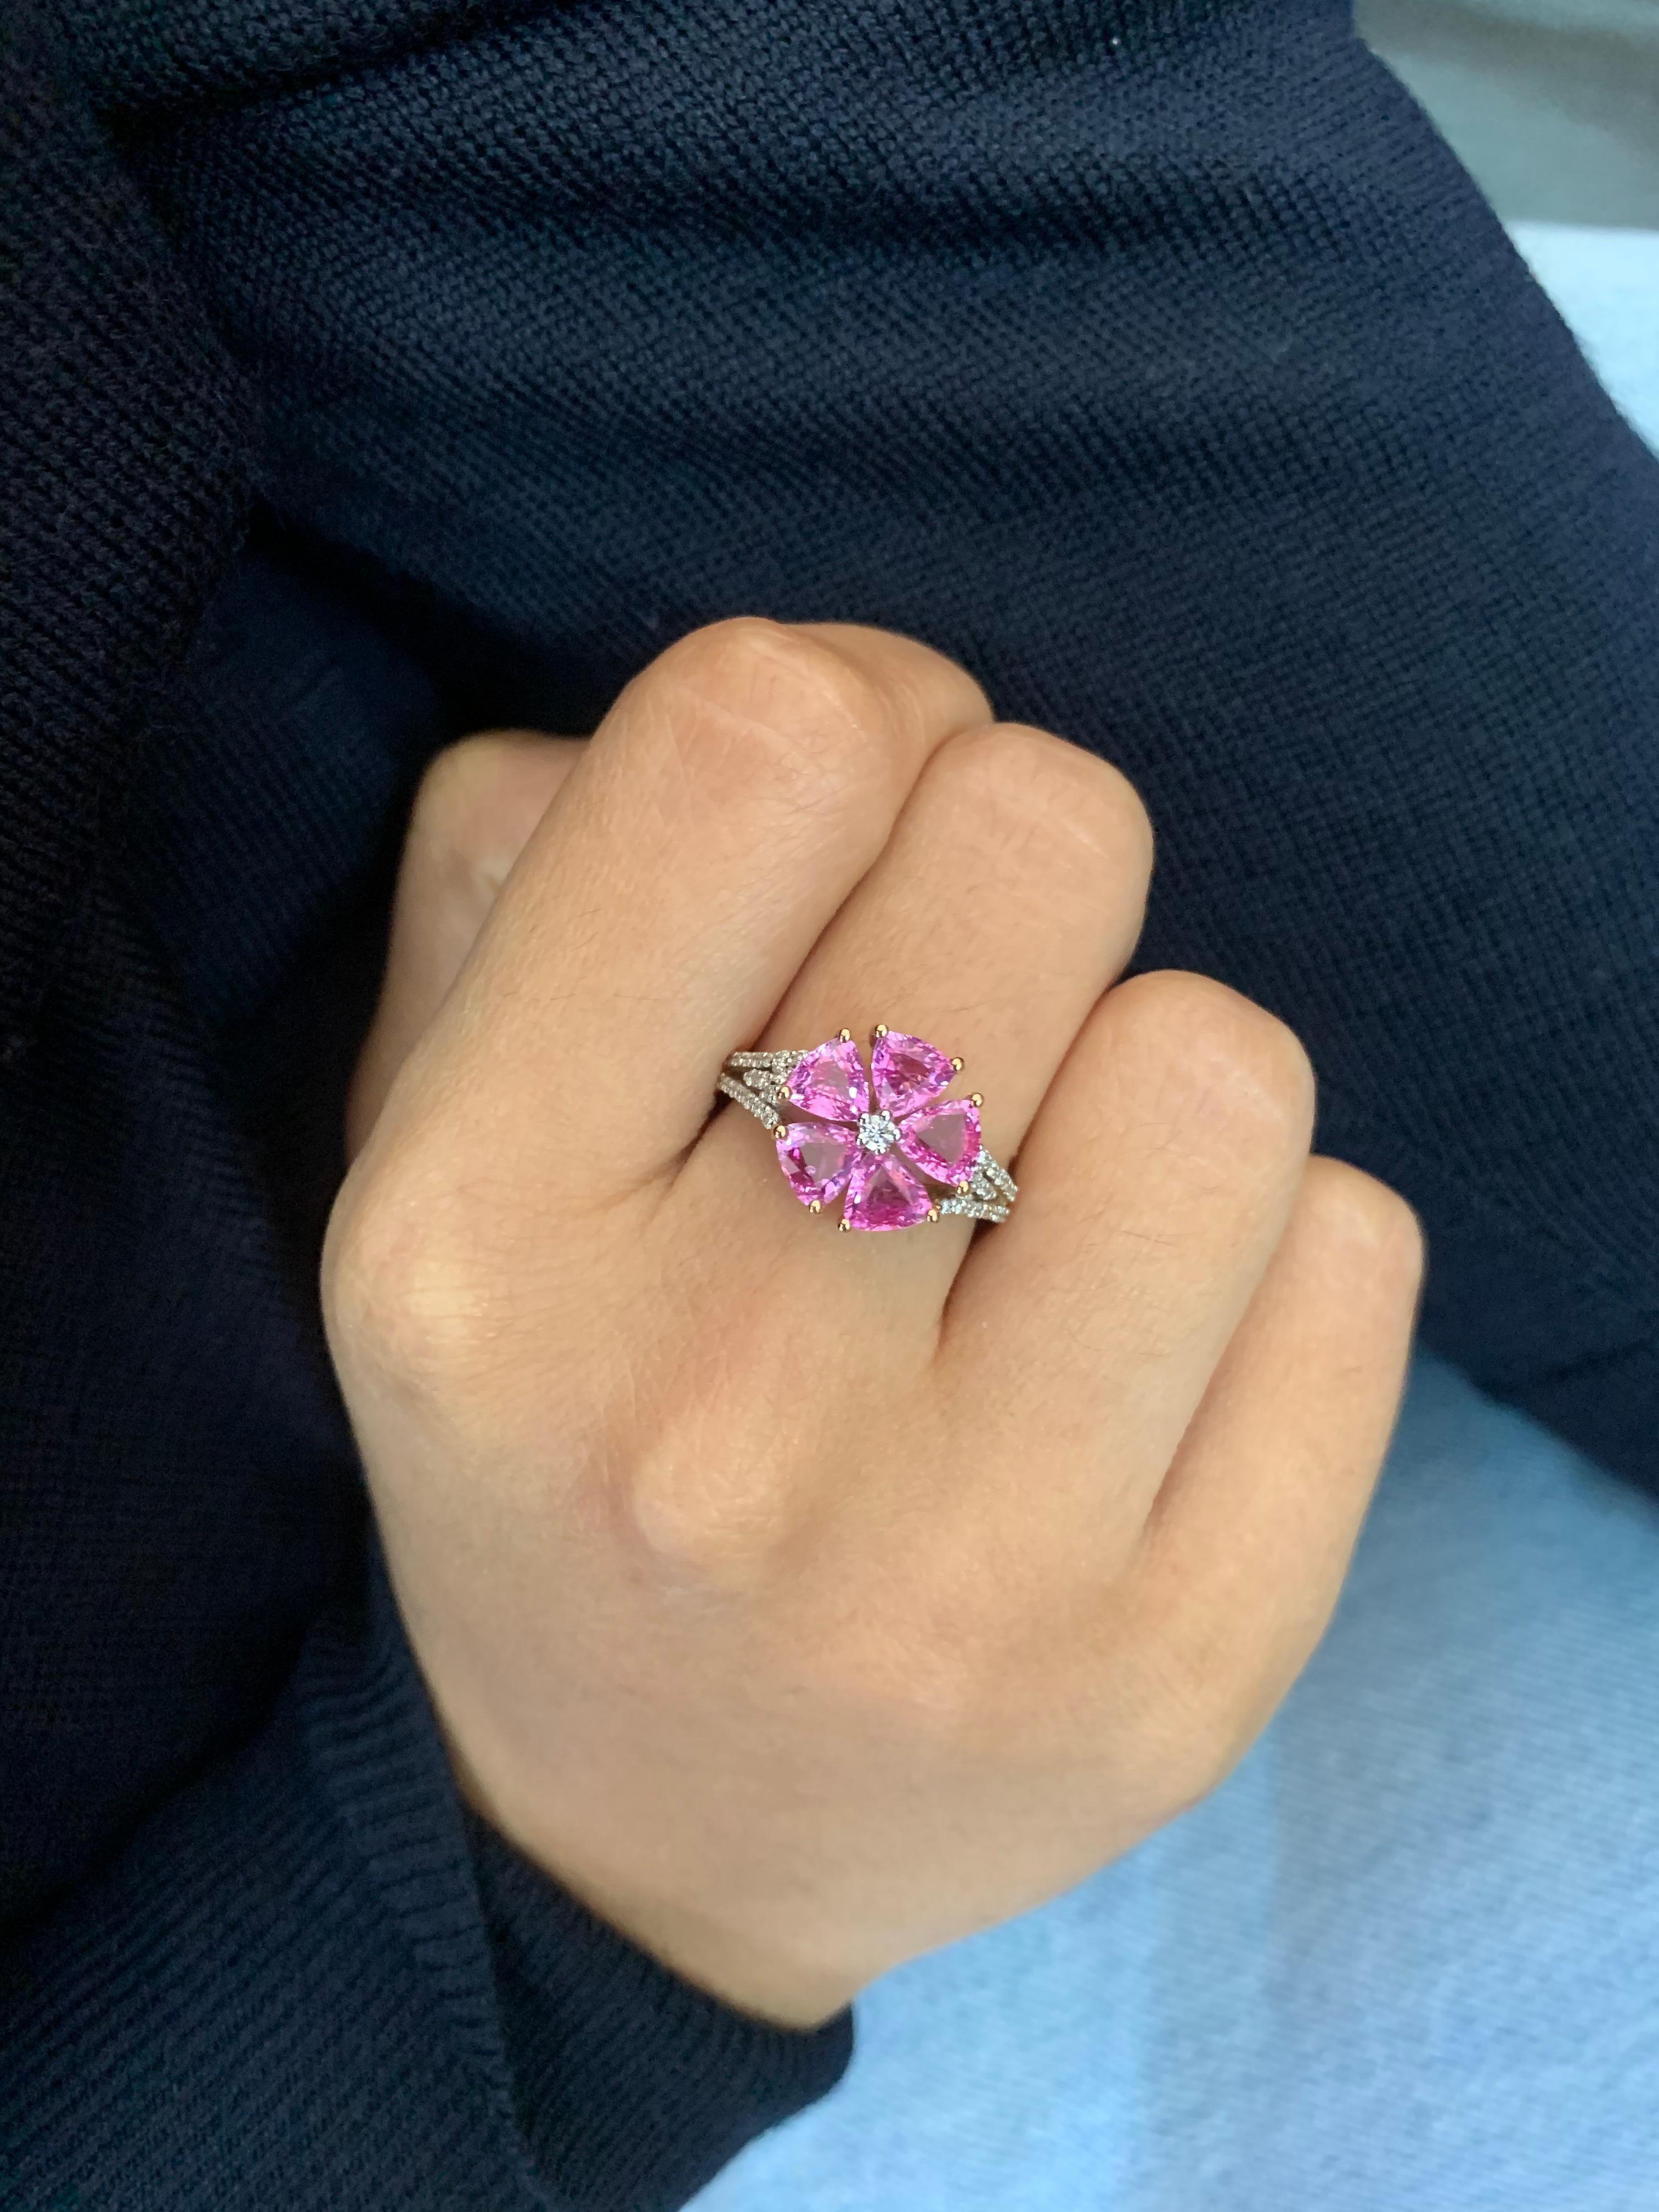 Contemporary 2.4 Carat Pink Sapphire Ring with Diamond in 18 Karat Rose Gold